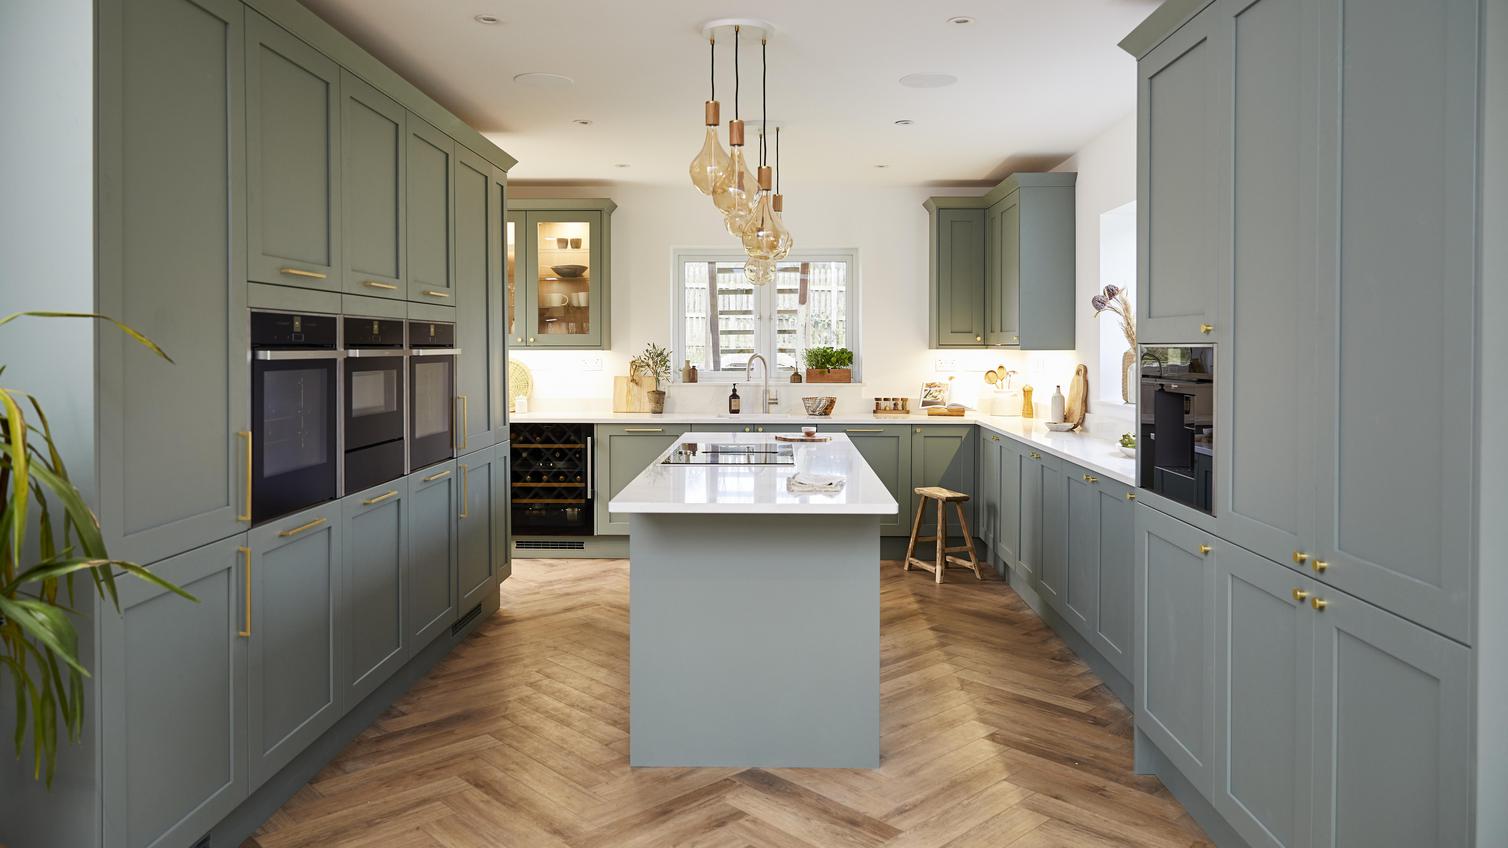 Sage green shaker kitchen in an island layout, with wooden chevron floors, brass handles, white worktops and pendant lights.